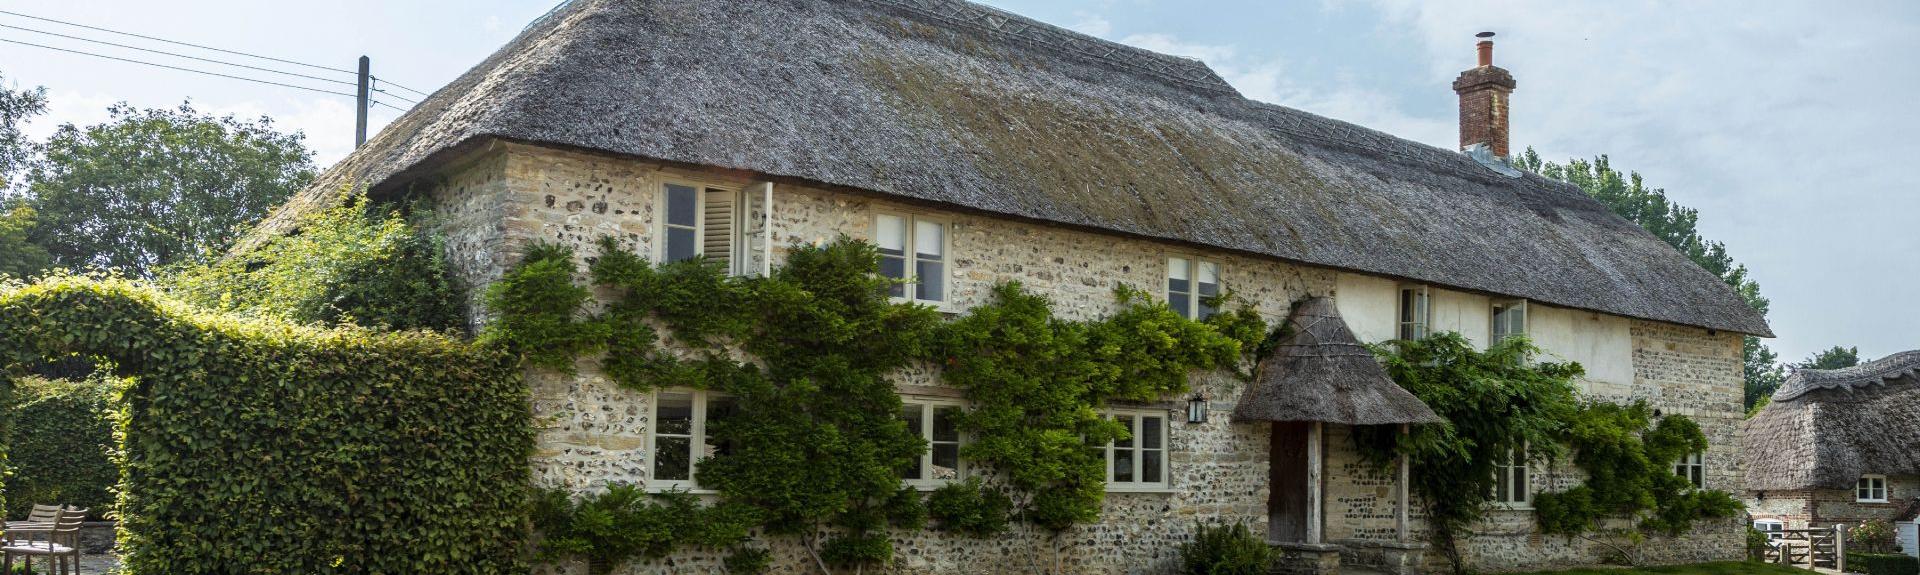 Large, thatched Dorset Farmhouse overlooking a courtyard.